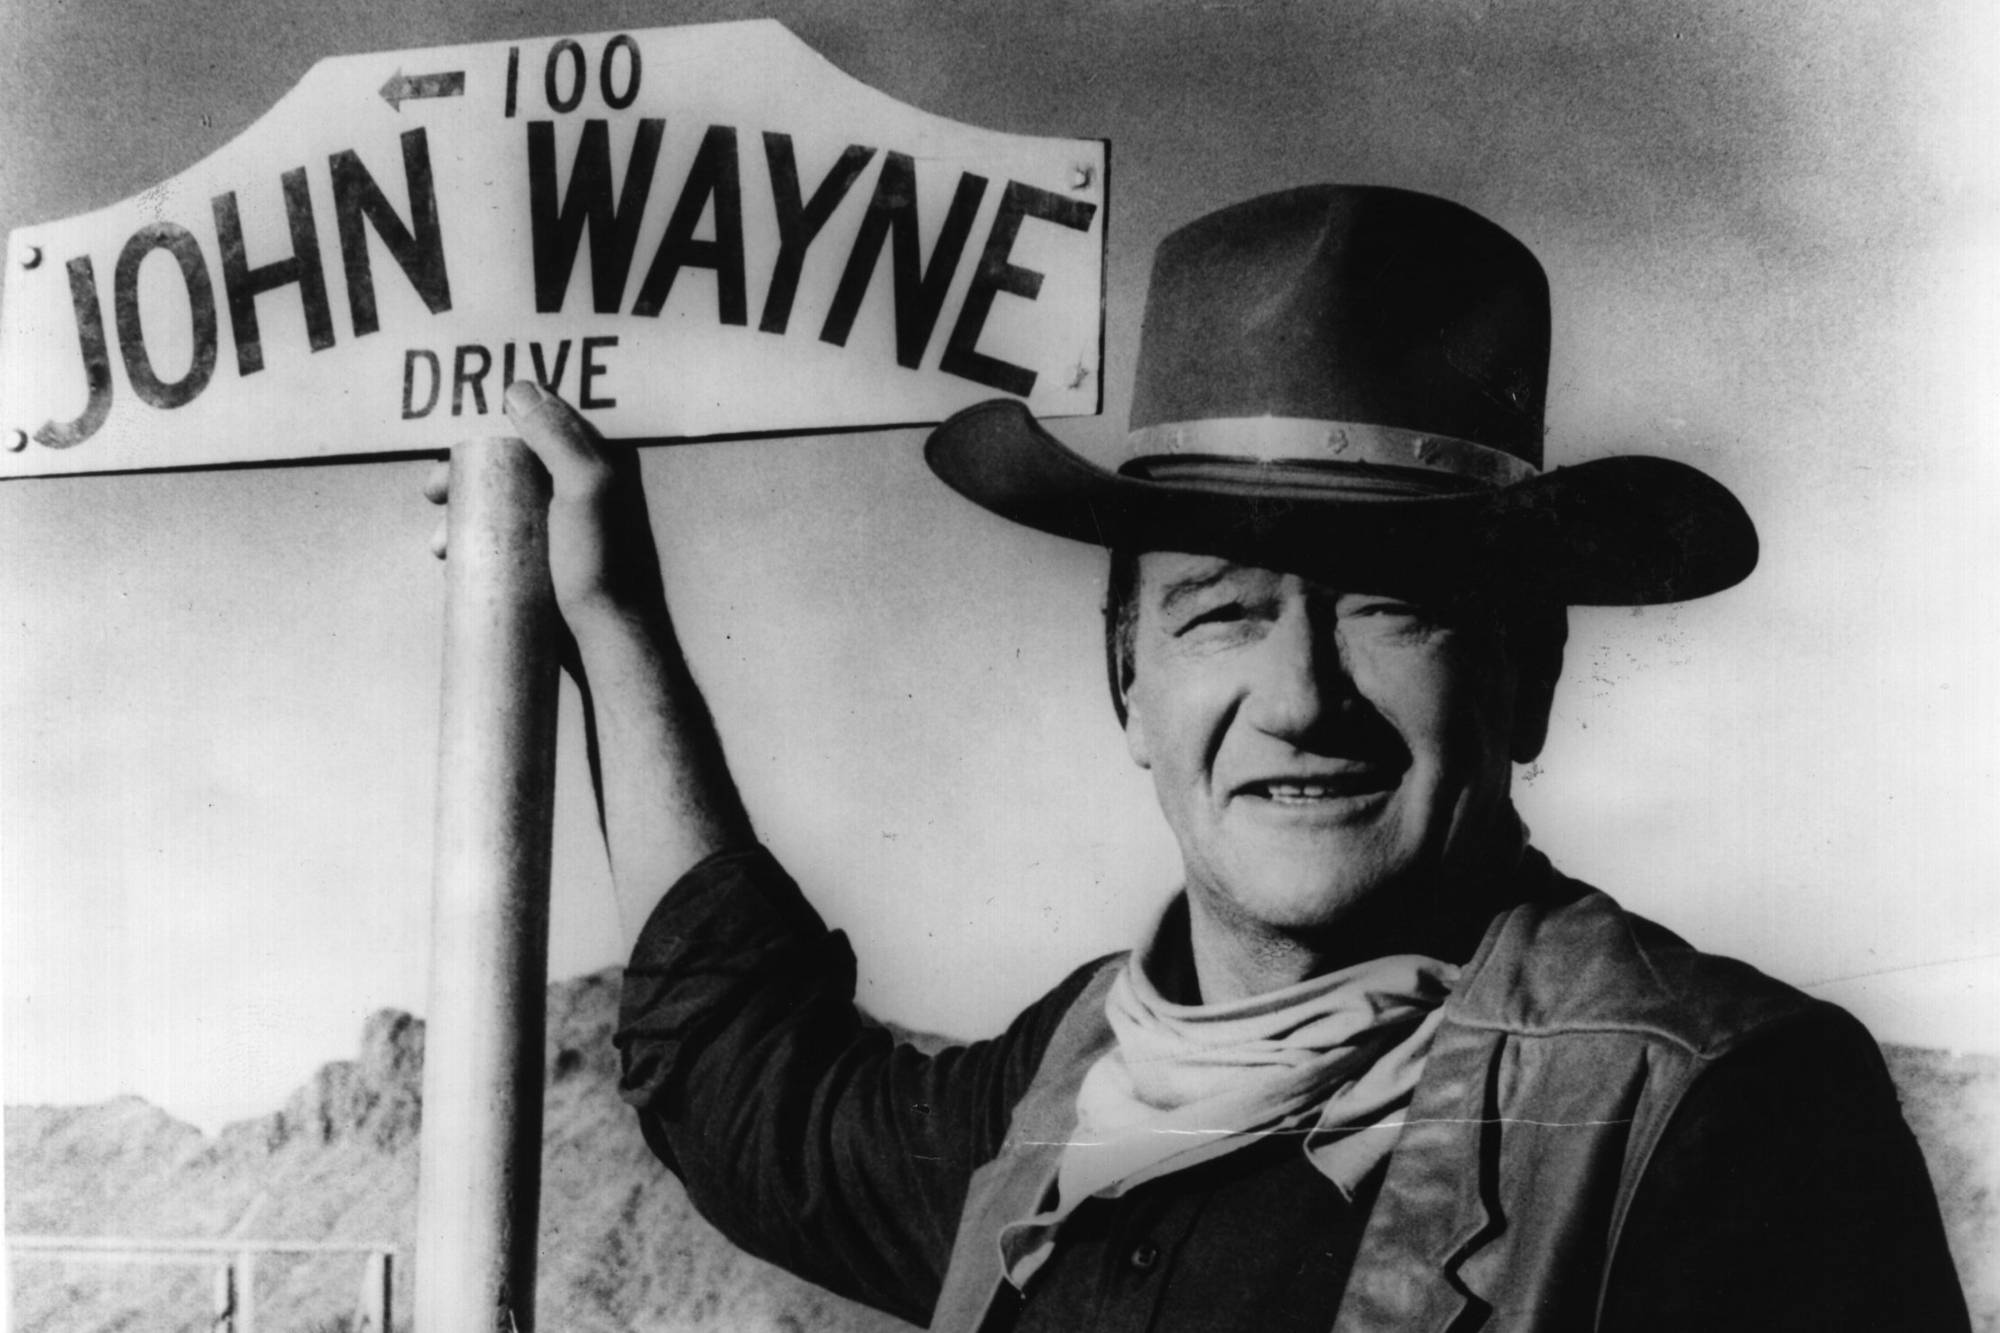 Western movie star John Wayne wearing a Western costume, with his hand on a street sign that reads 'John Wayne Drive'